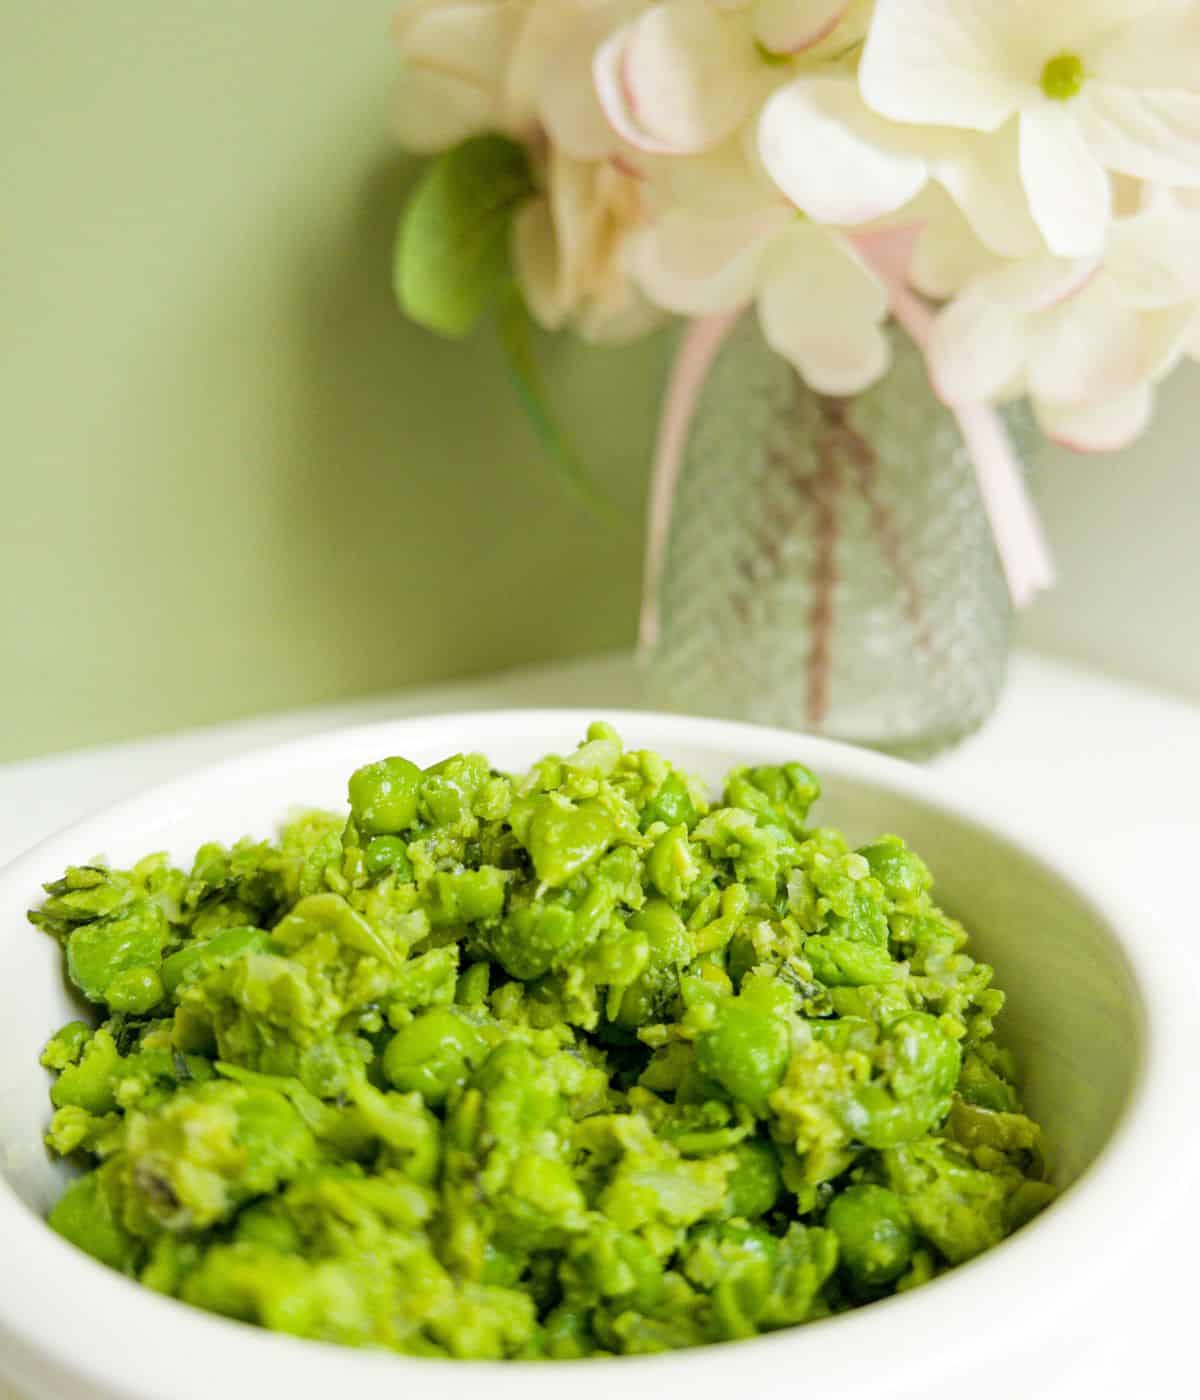 Minted mushy peas in a white bowl with a vase of flowers in the background.